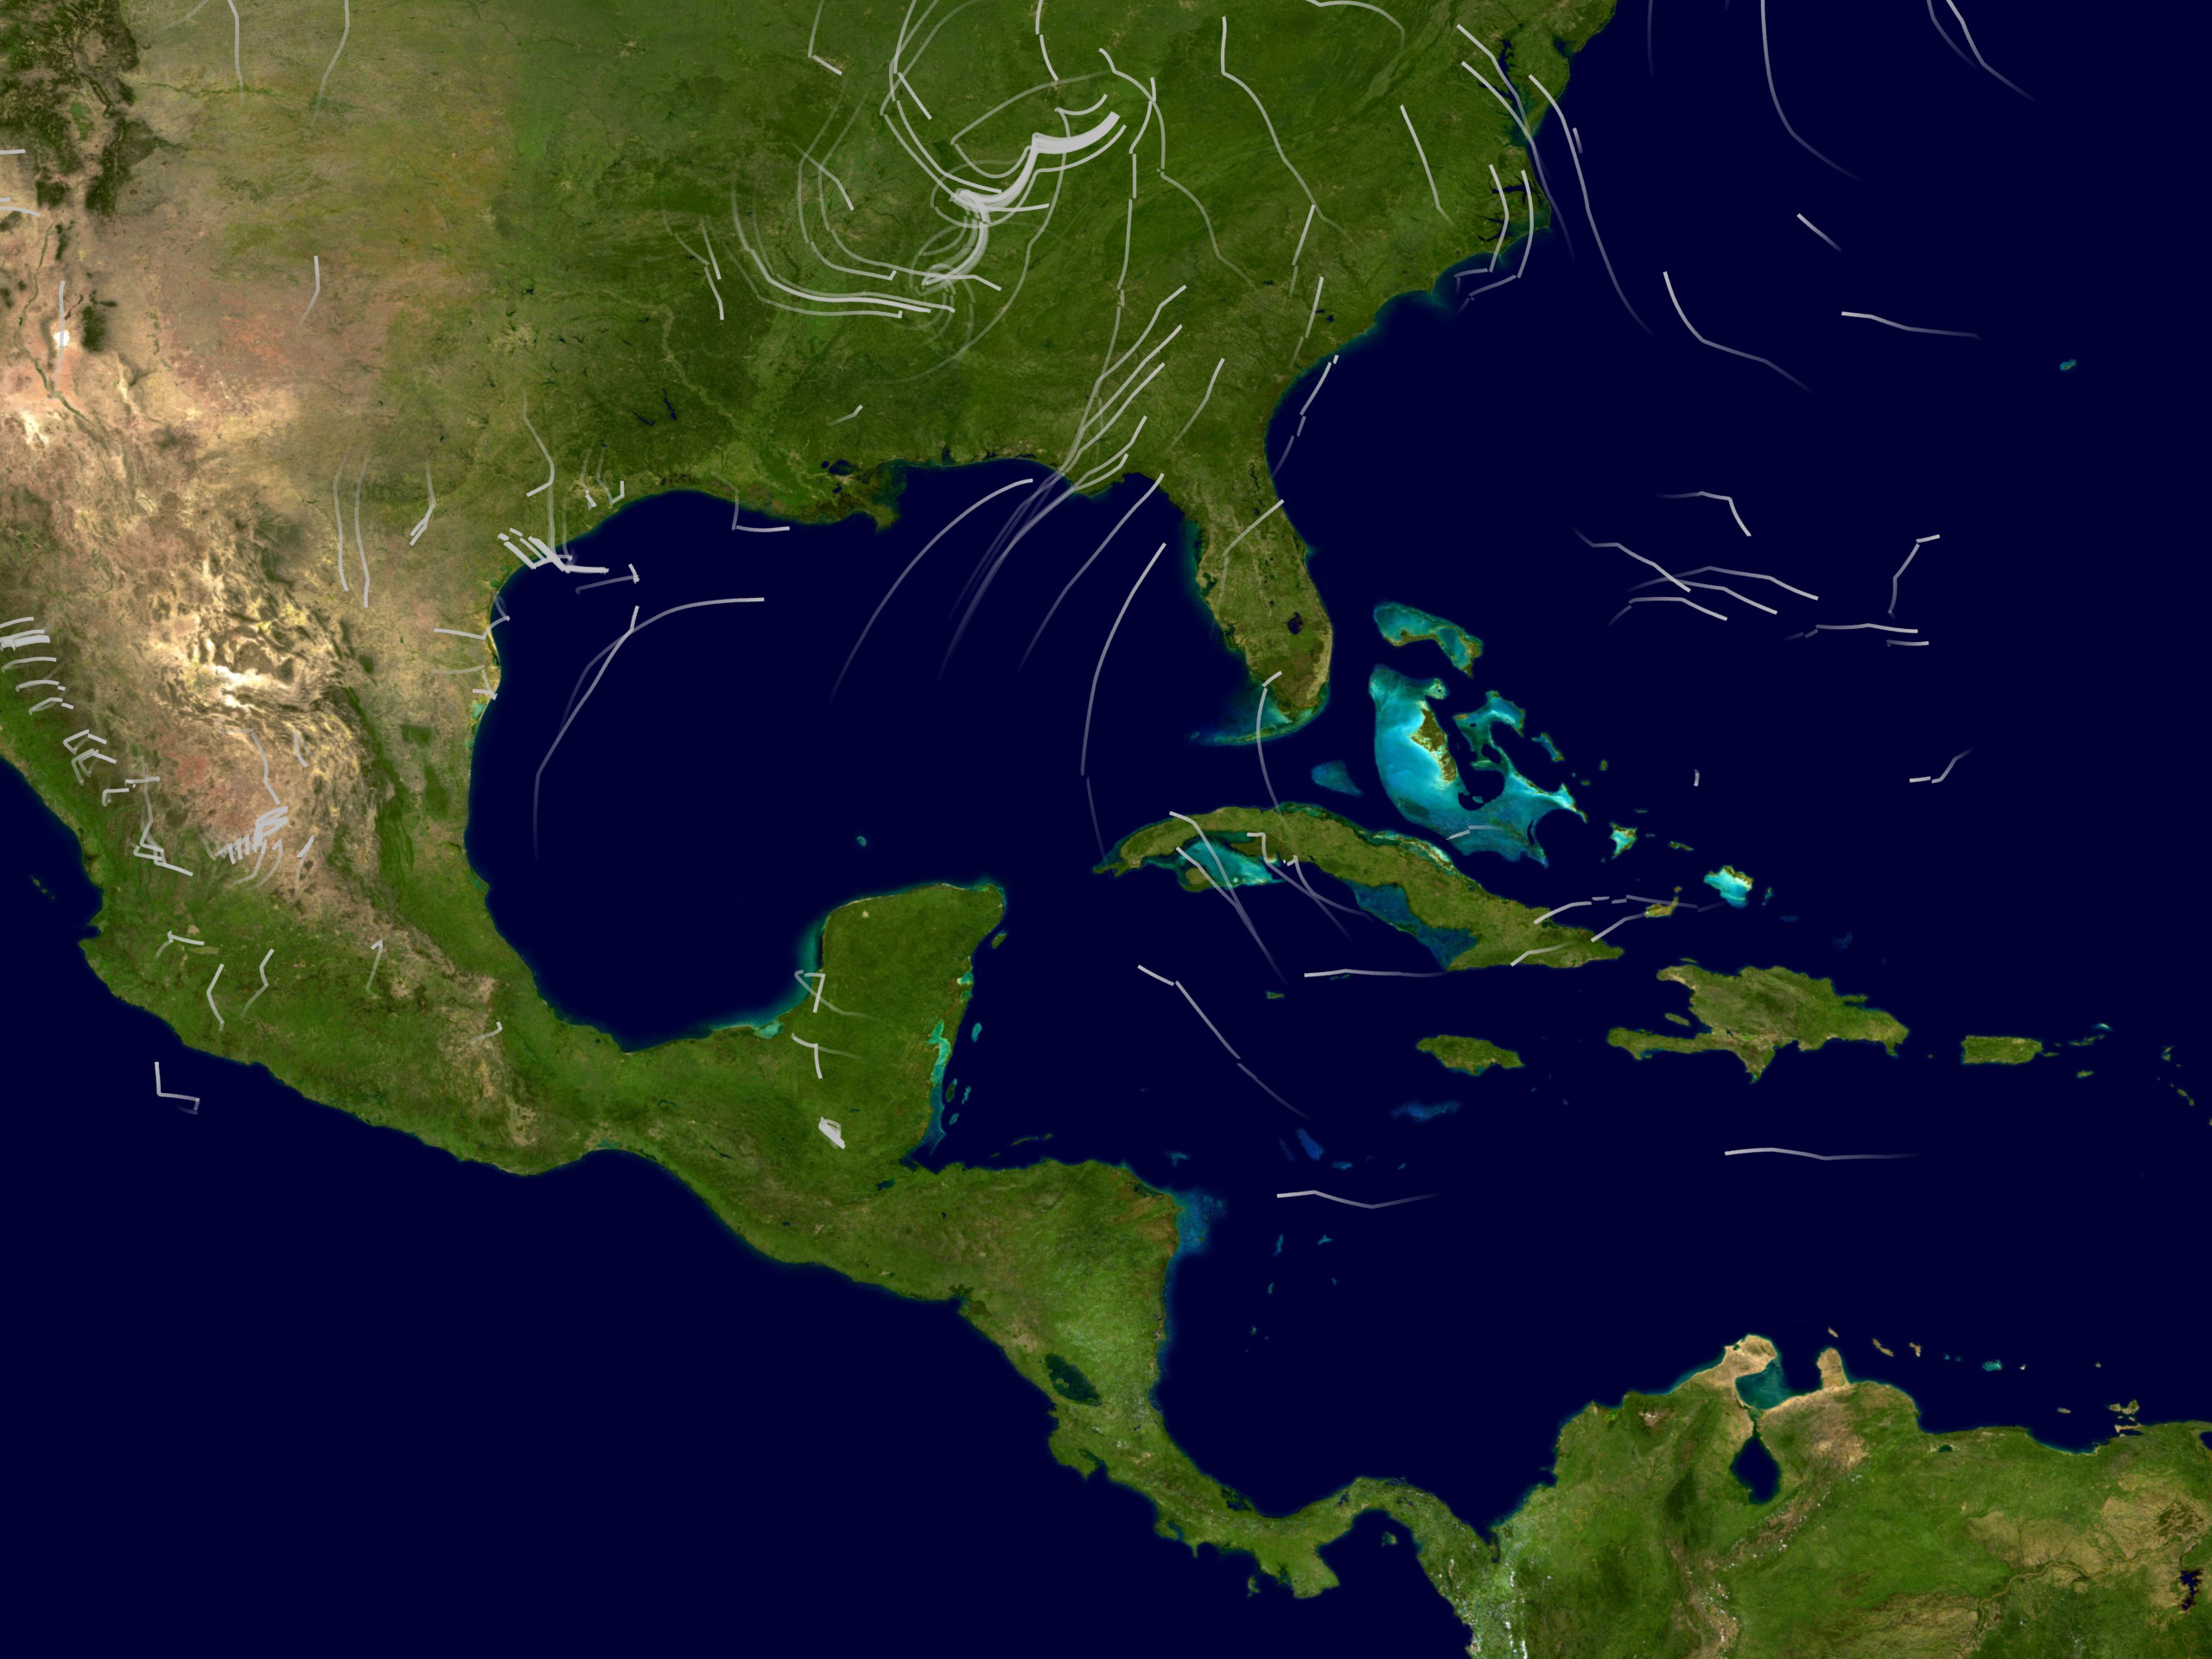 August 31, 2005 - Katrina is now classified as a Tropical Depression with winds of 28.8 mph.